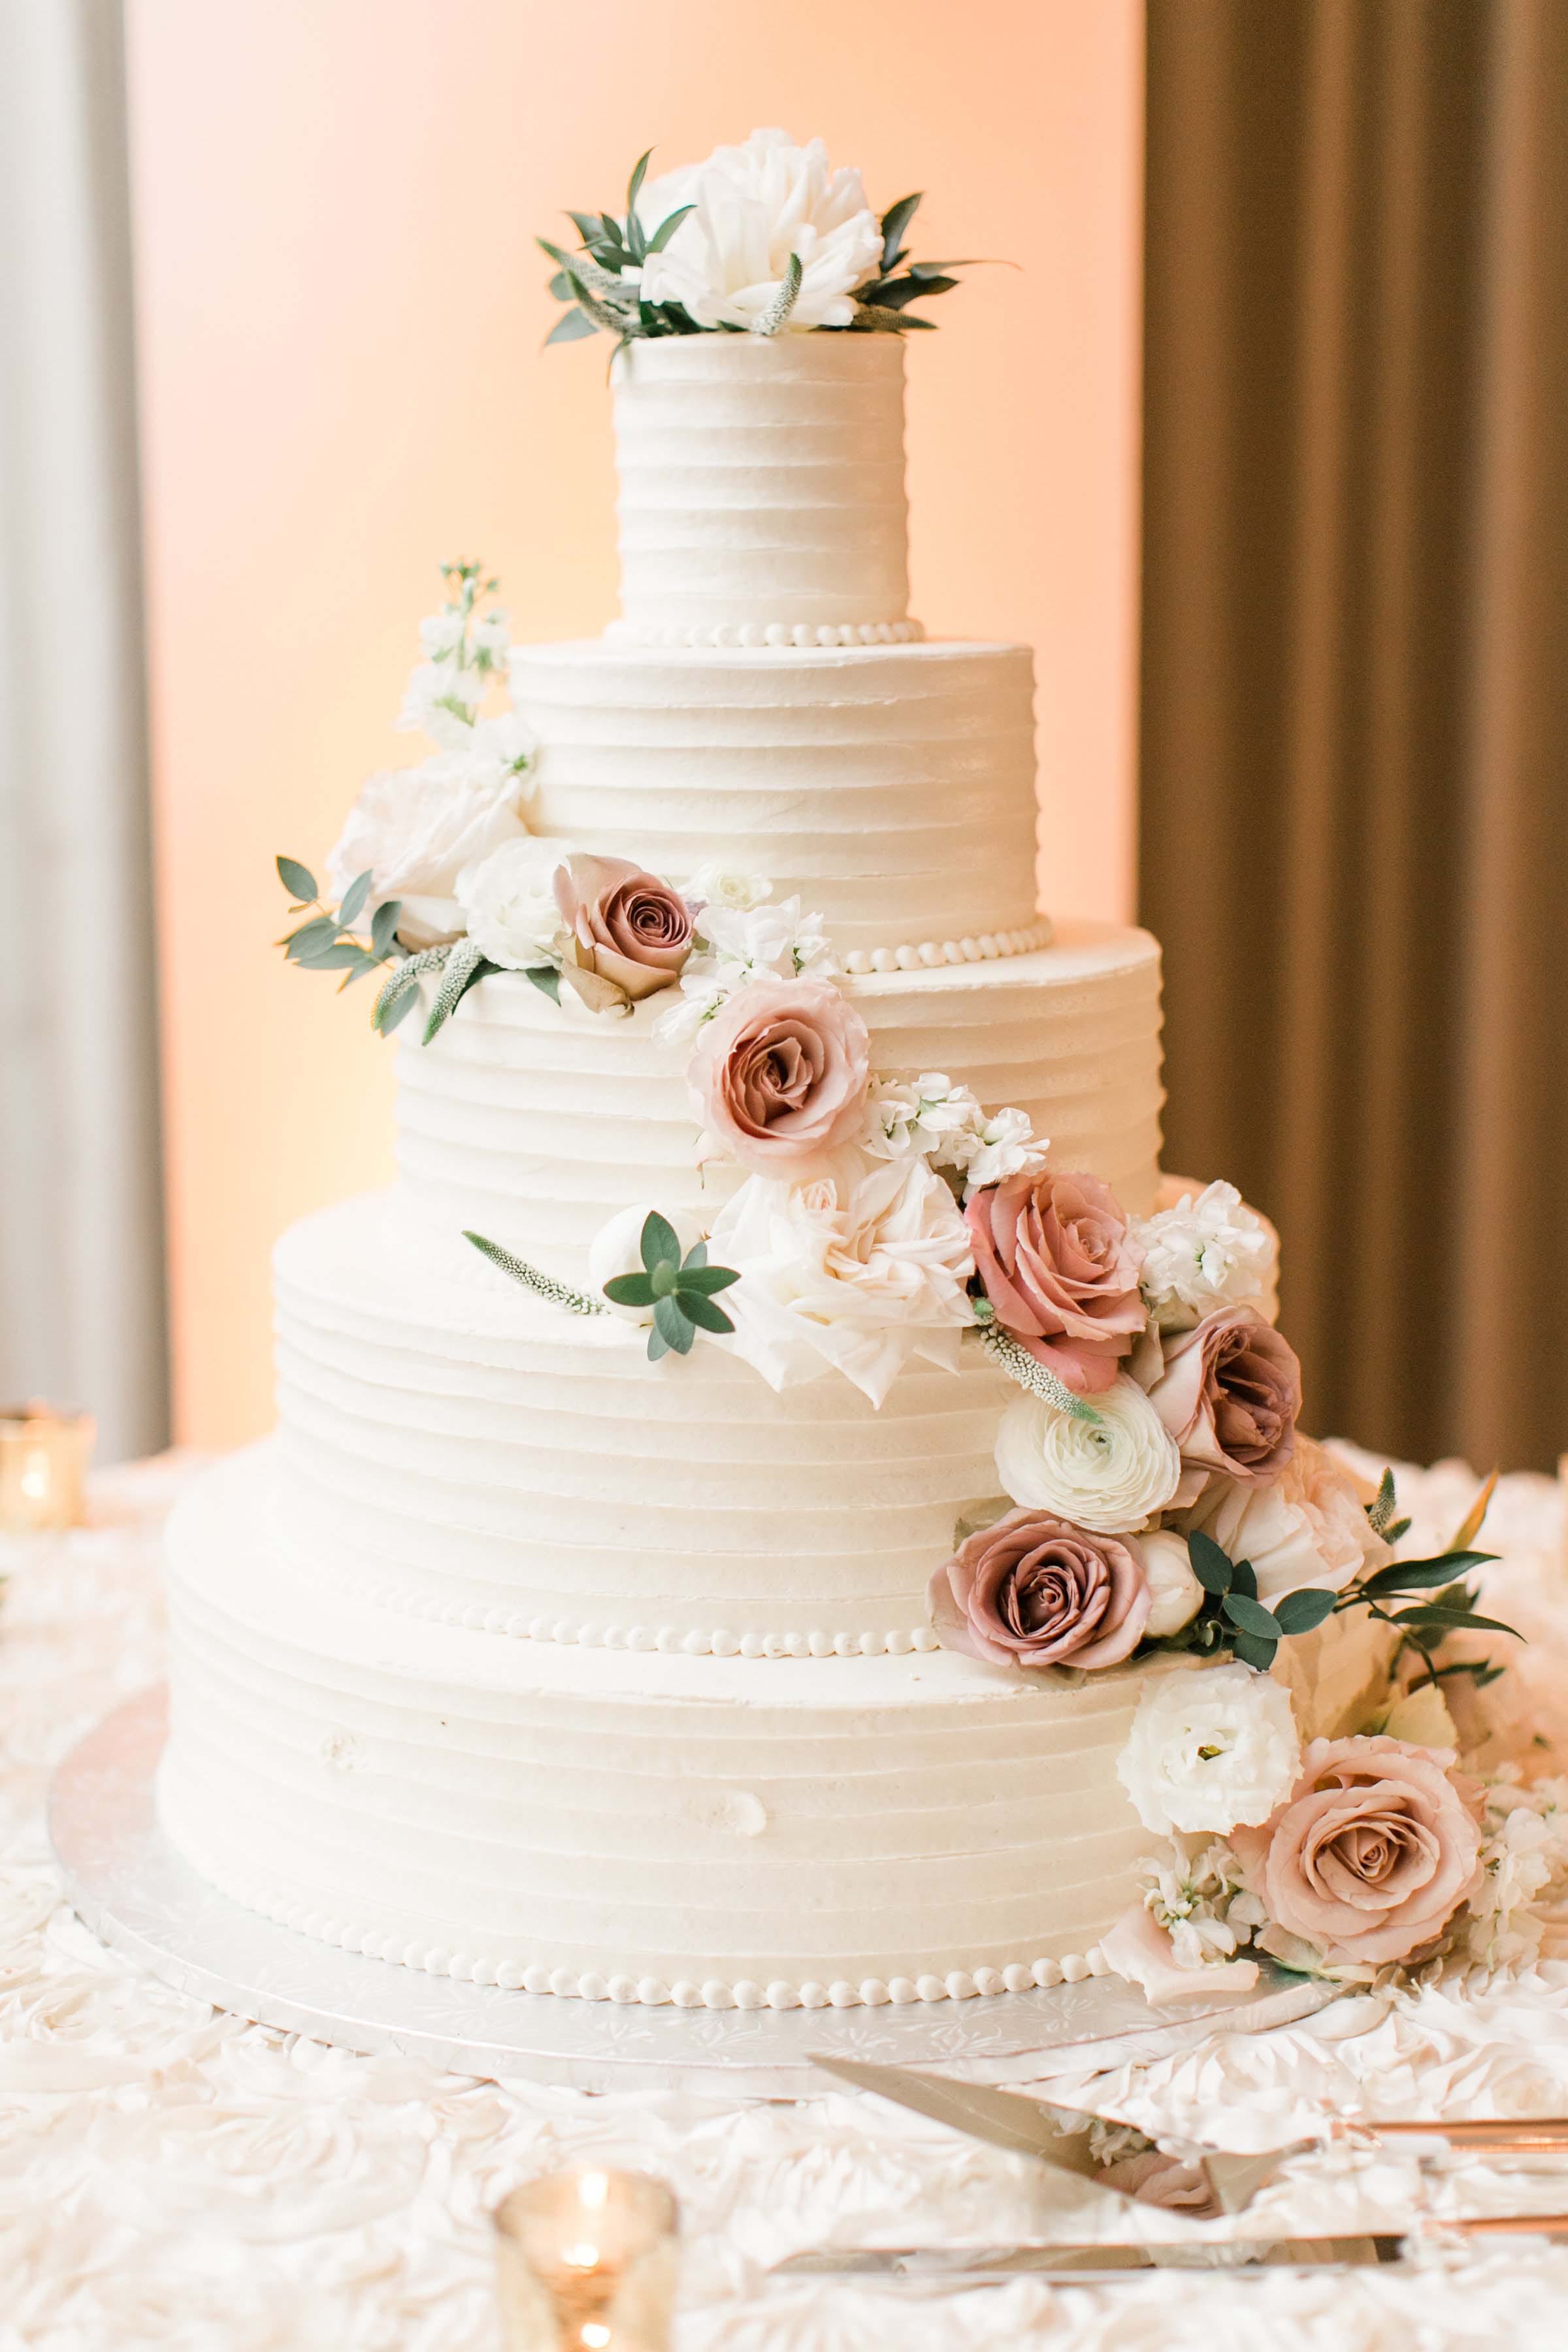 How to assemble a tiered wedding cake